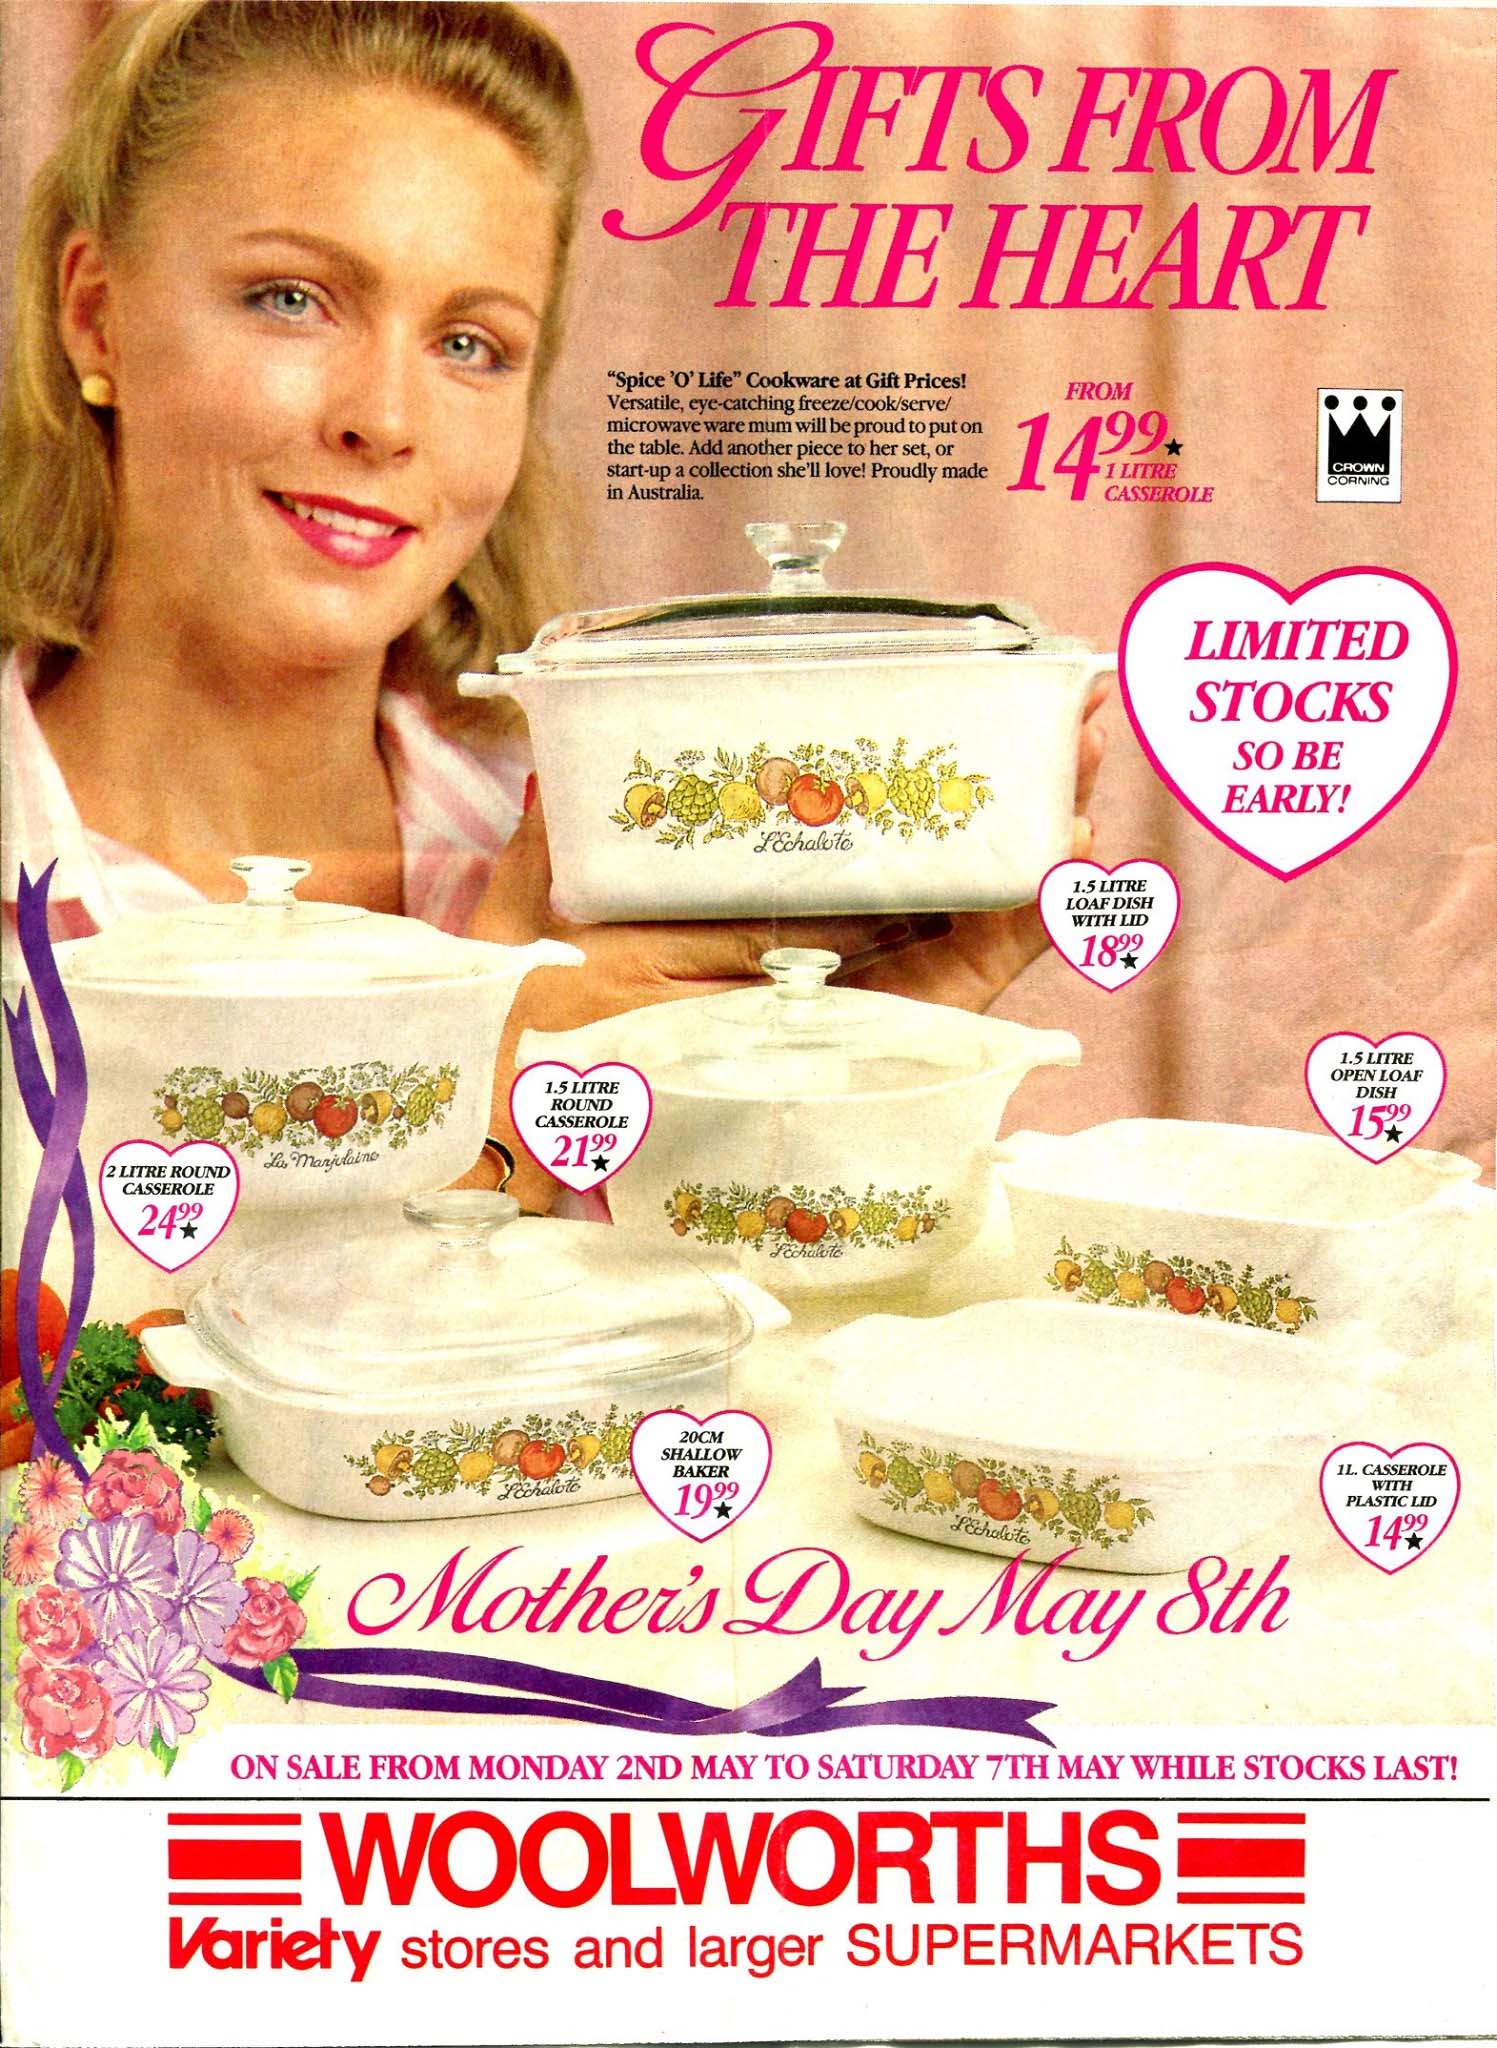 A Mother’s Day ad for some Woolworths’ baking dishes.